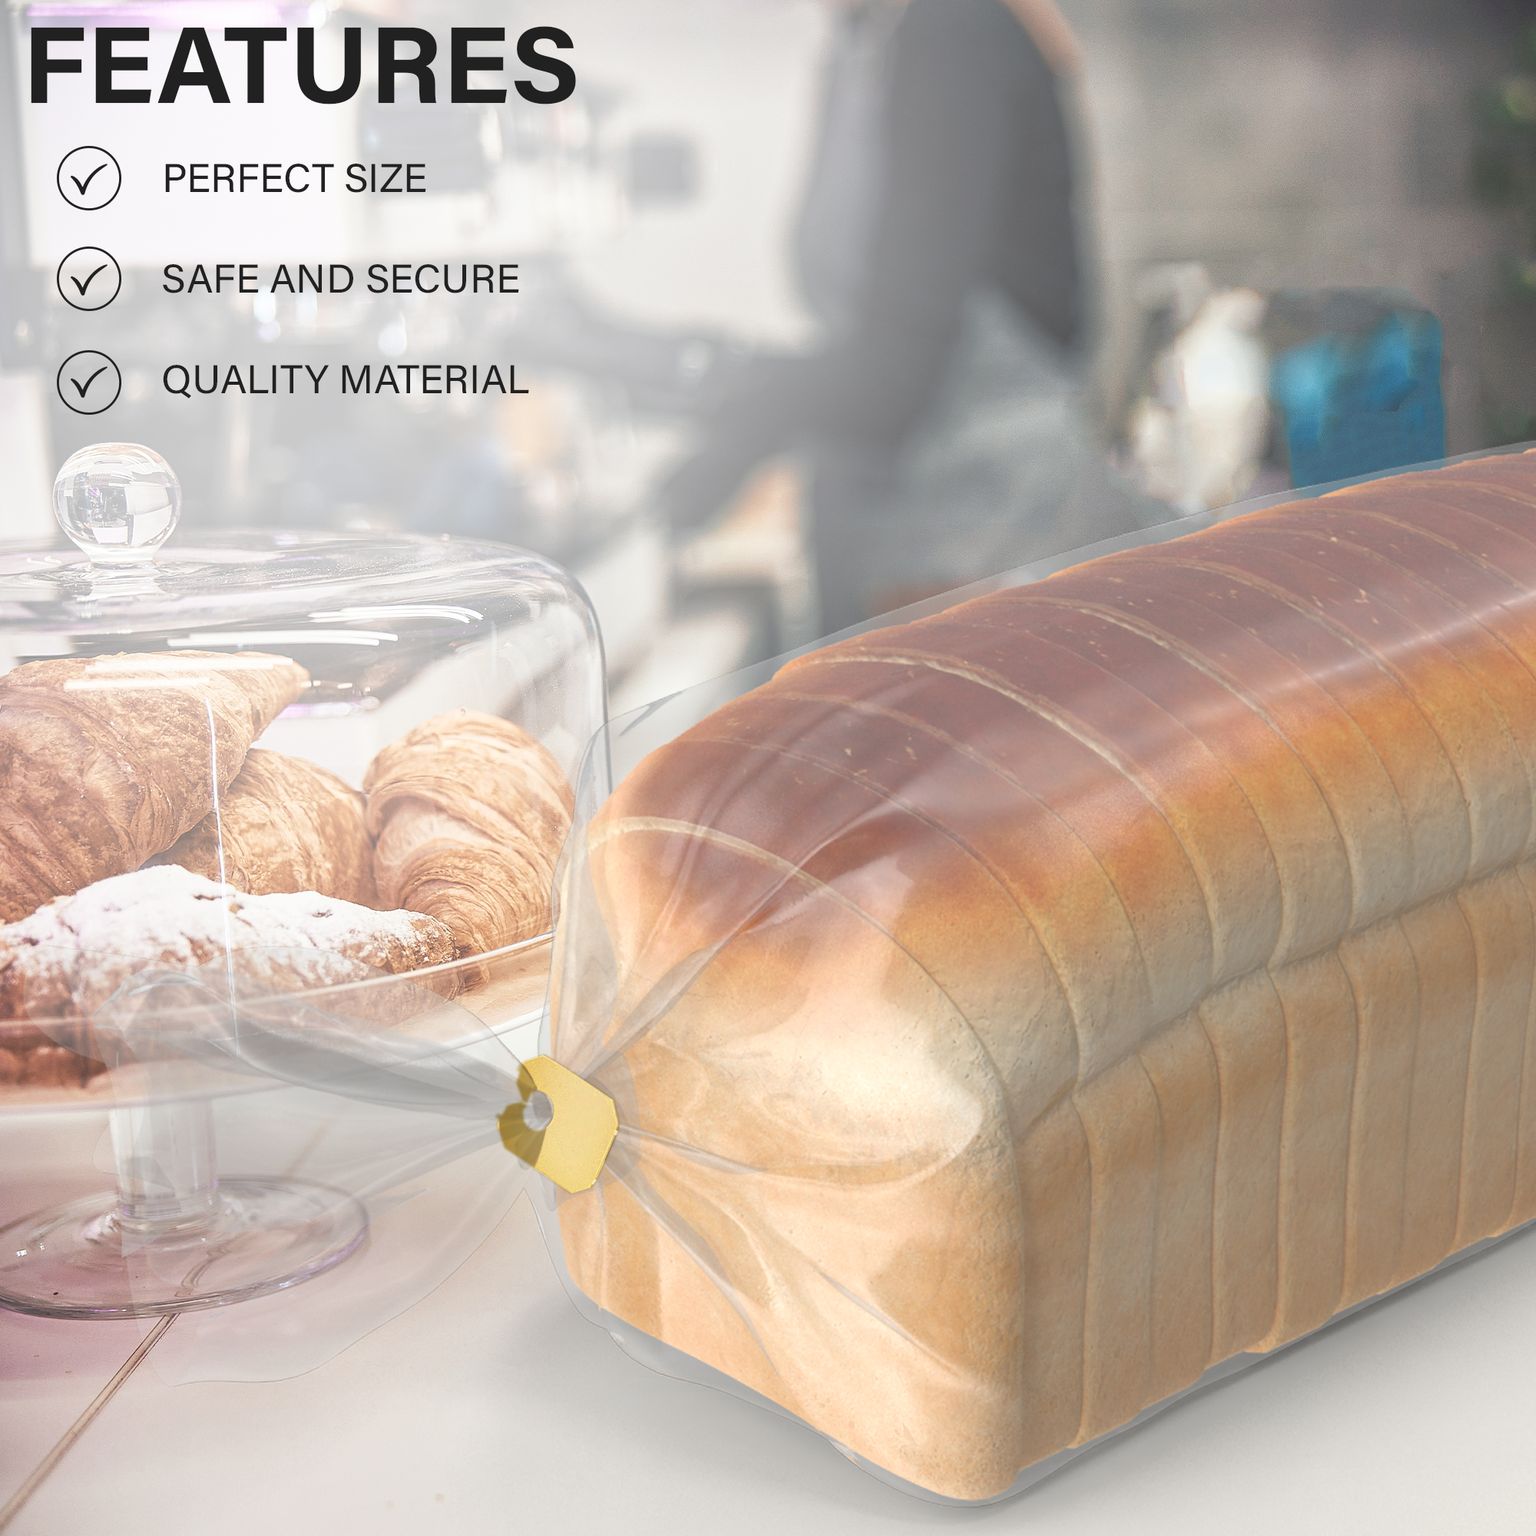 Bagged & Tagged: An Introductory Field Guide to Plastic Bread